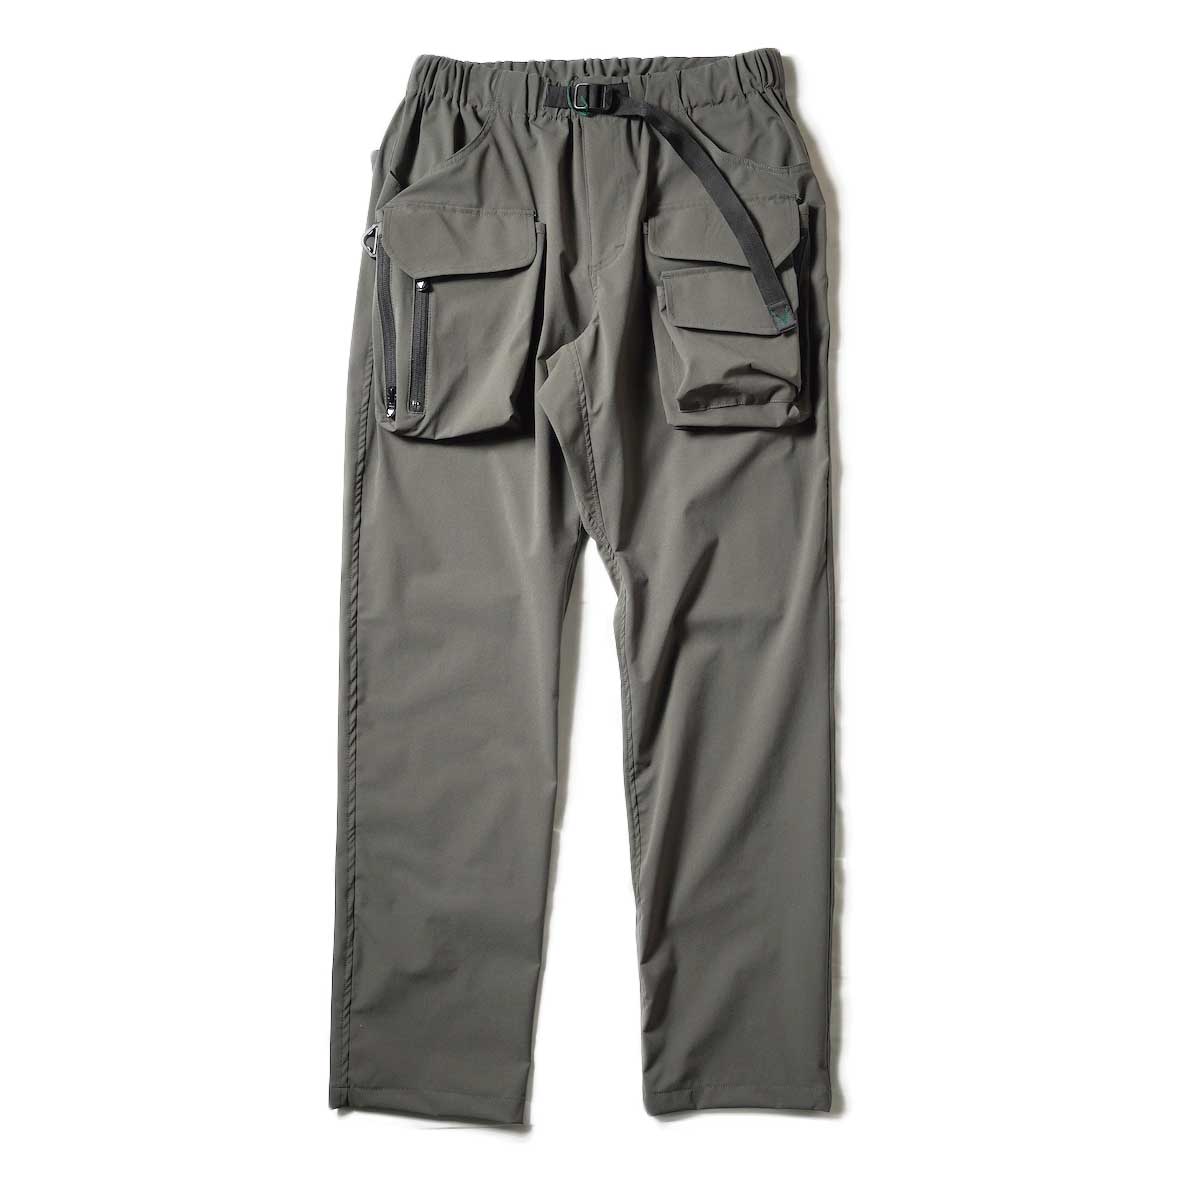 South2 West8 / Tenkara trout Pants - Poly Ripstop (Charcoal)